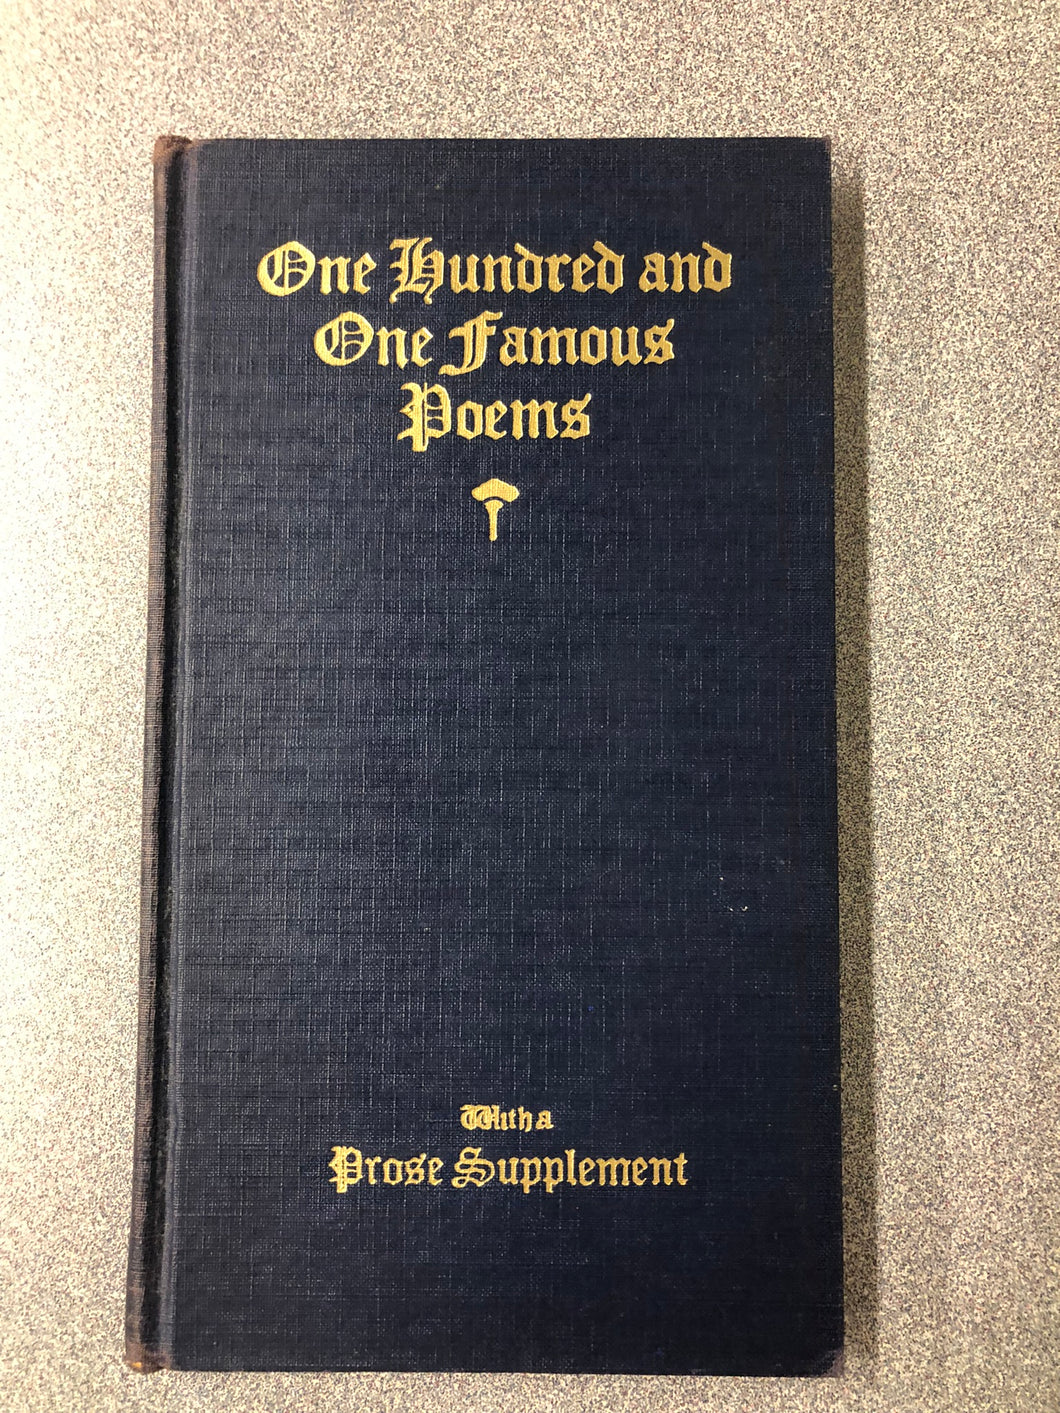 One Hundred and One Famous Poems, With a Prose Supplement, Cook, Roy J. ed. [1929] P 8/22